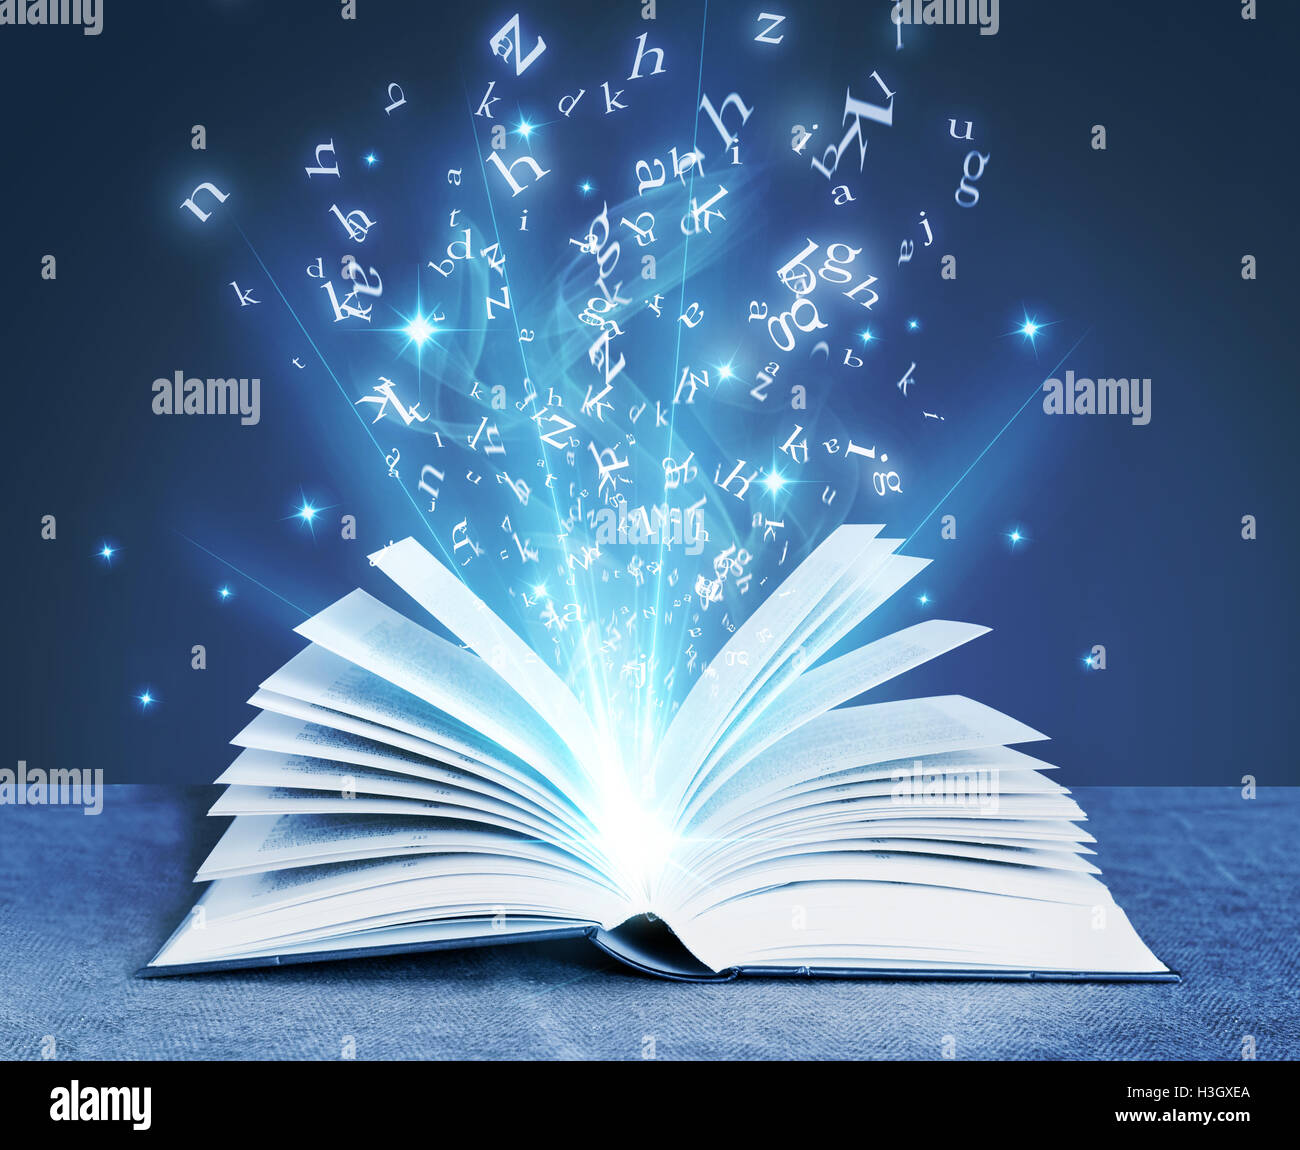 Mystery Open Book With Shining Pages Fantasy Book With Magic Light Sparkles  And Stars Vector Illustration Stock Illustration - Download Image Now -  iStock